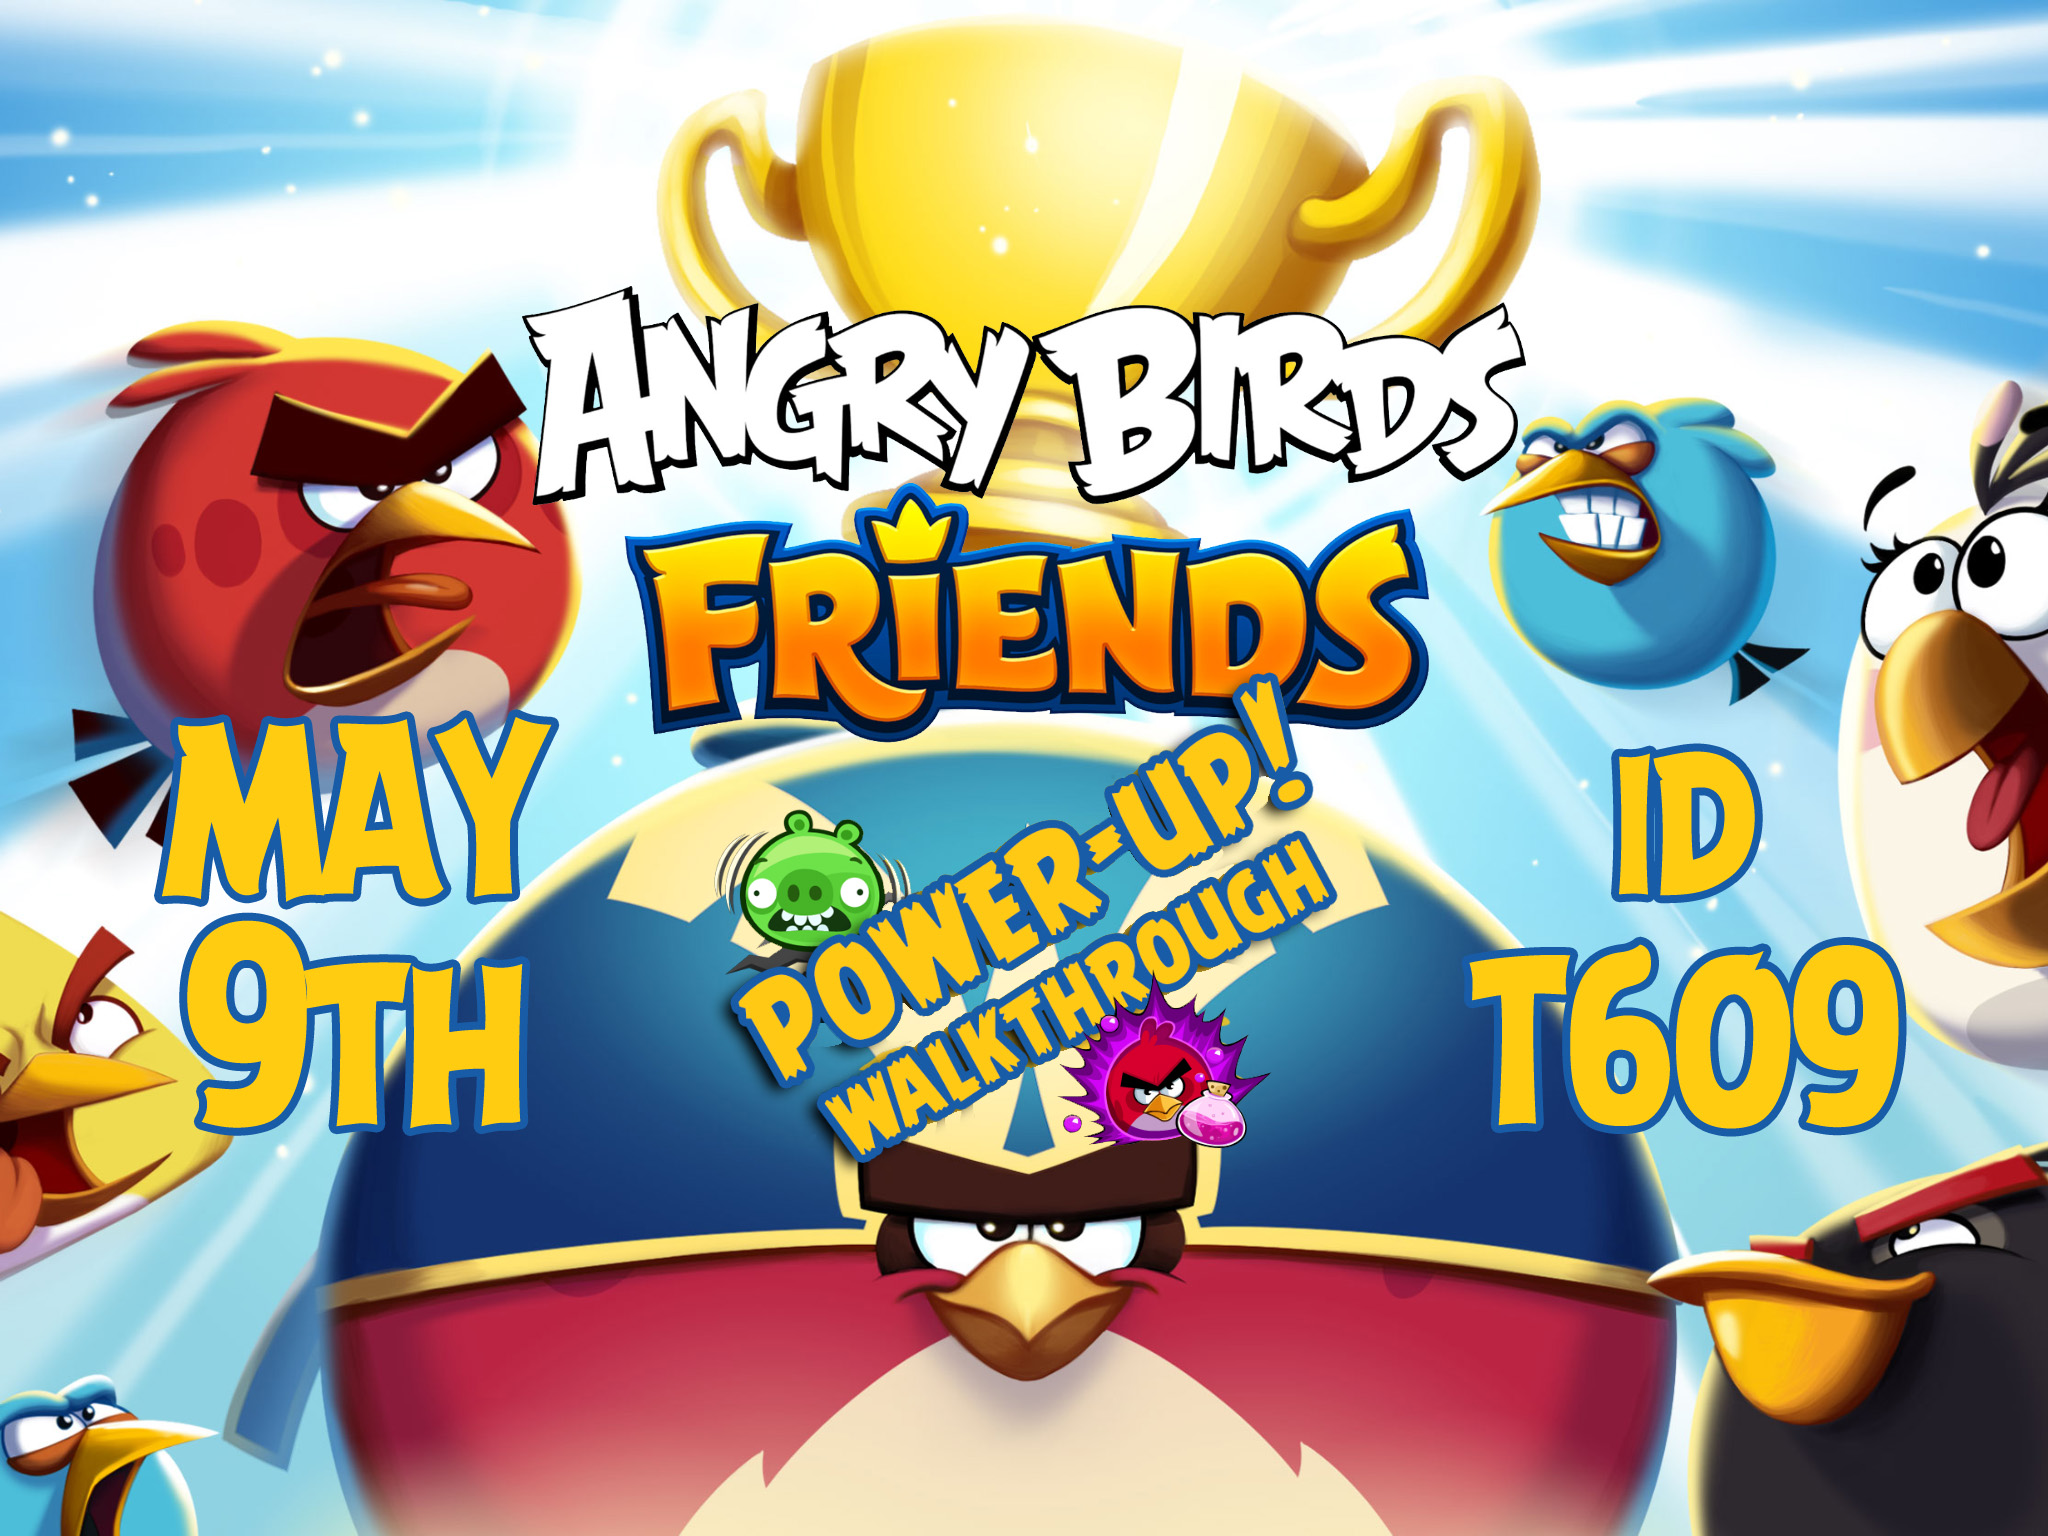 Angry-Birds-Friends-Tournament-T609-Feature-Image-PU